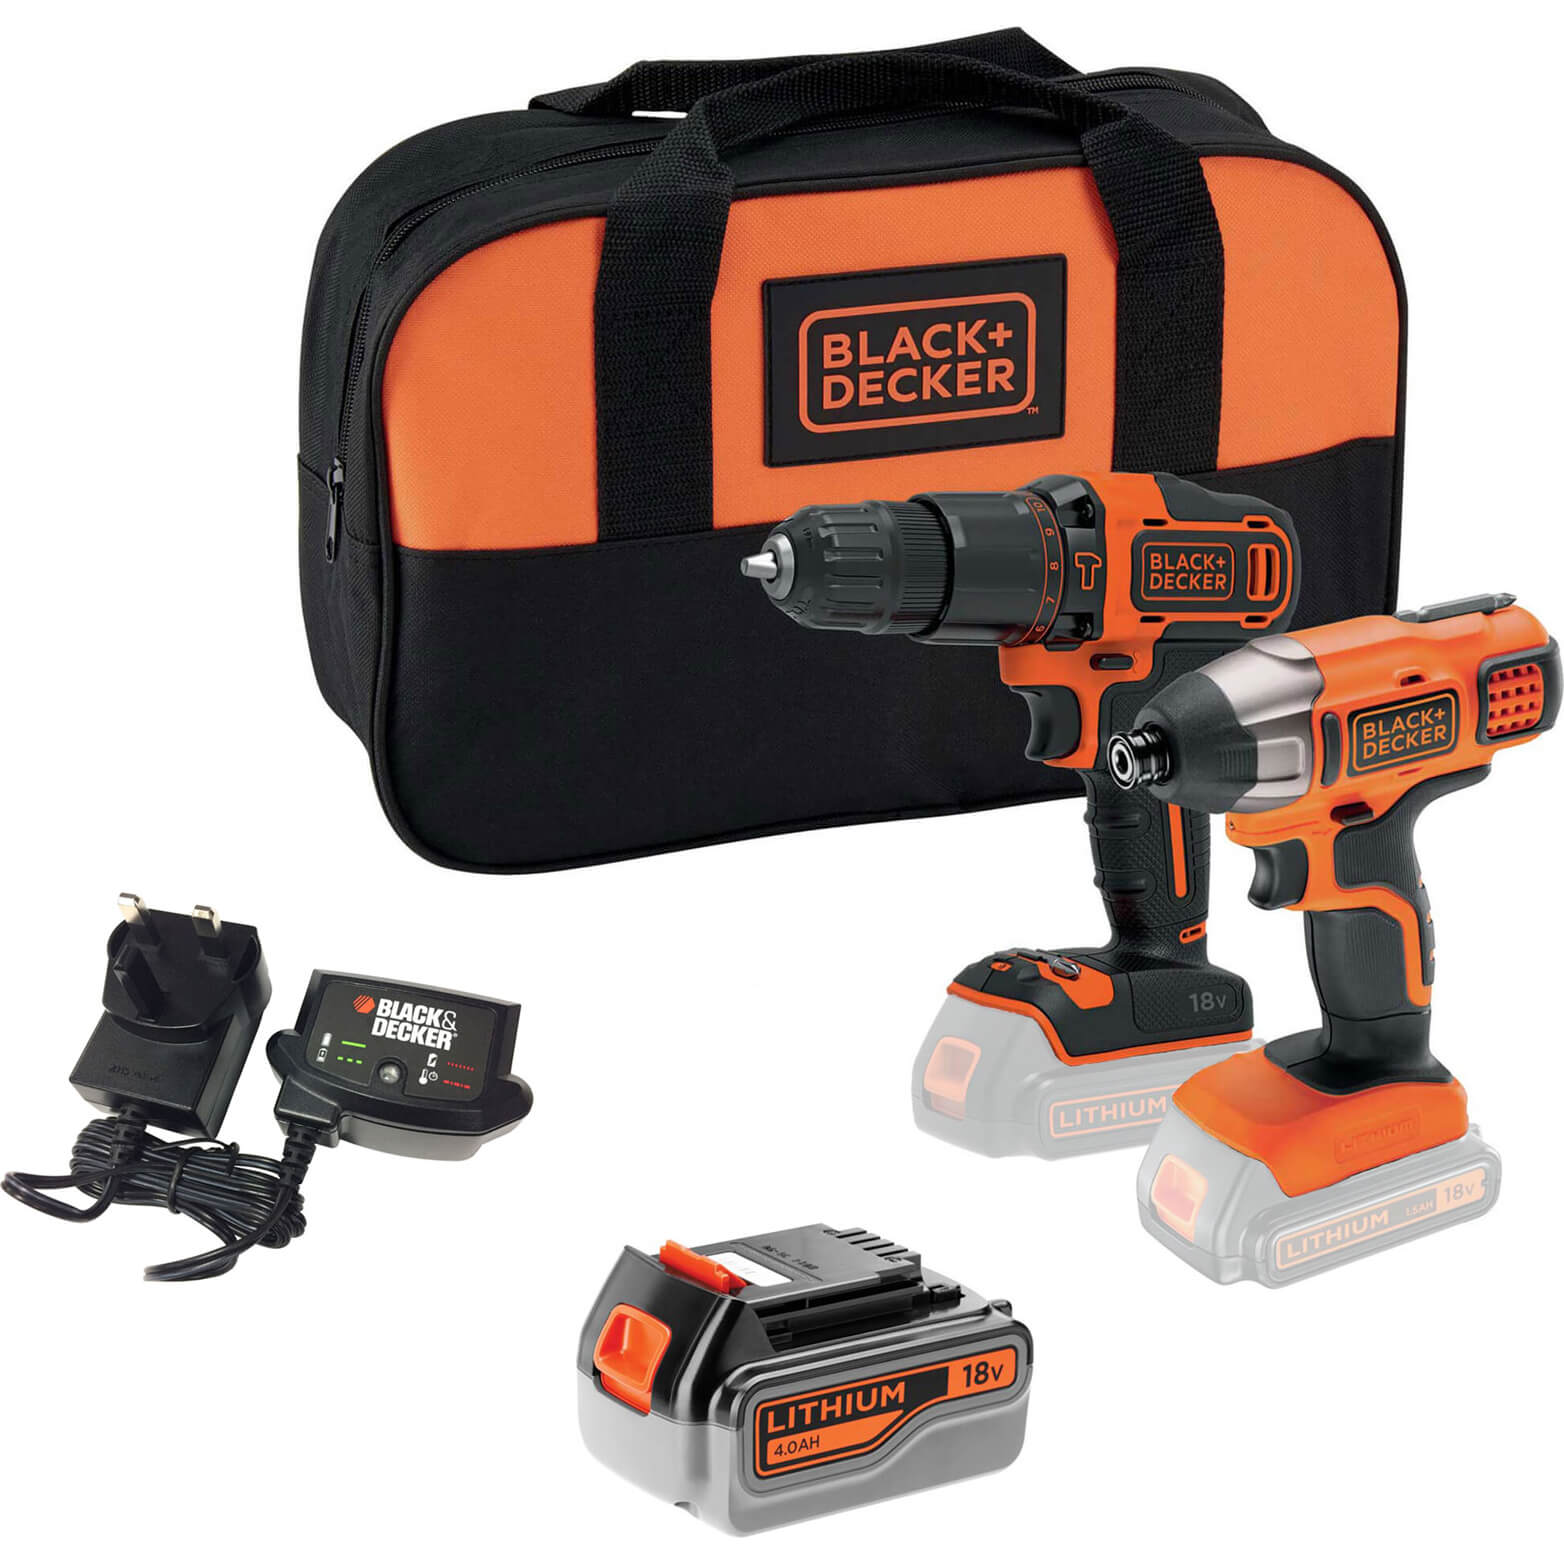 Image of Black and Decker BCK25S2S 18v Cordless Combi Drill and Impact Driver Kit 1 x 4ah Li-ion Charger Bag